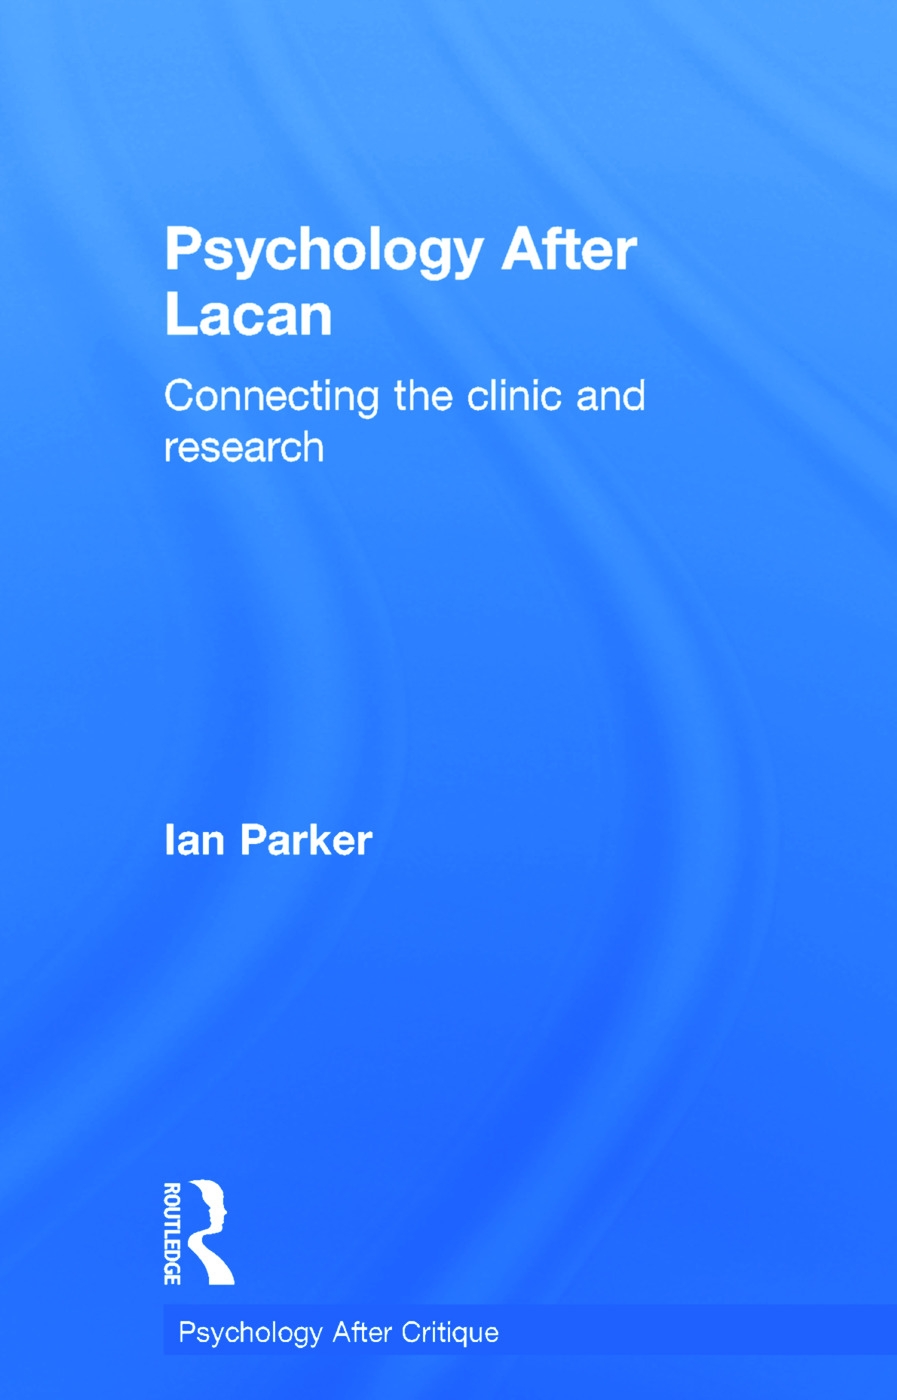 Psychology After Lacan: Connecting the Clinic and Research